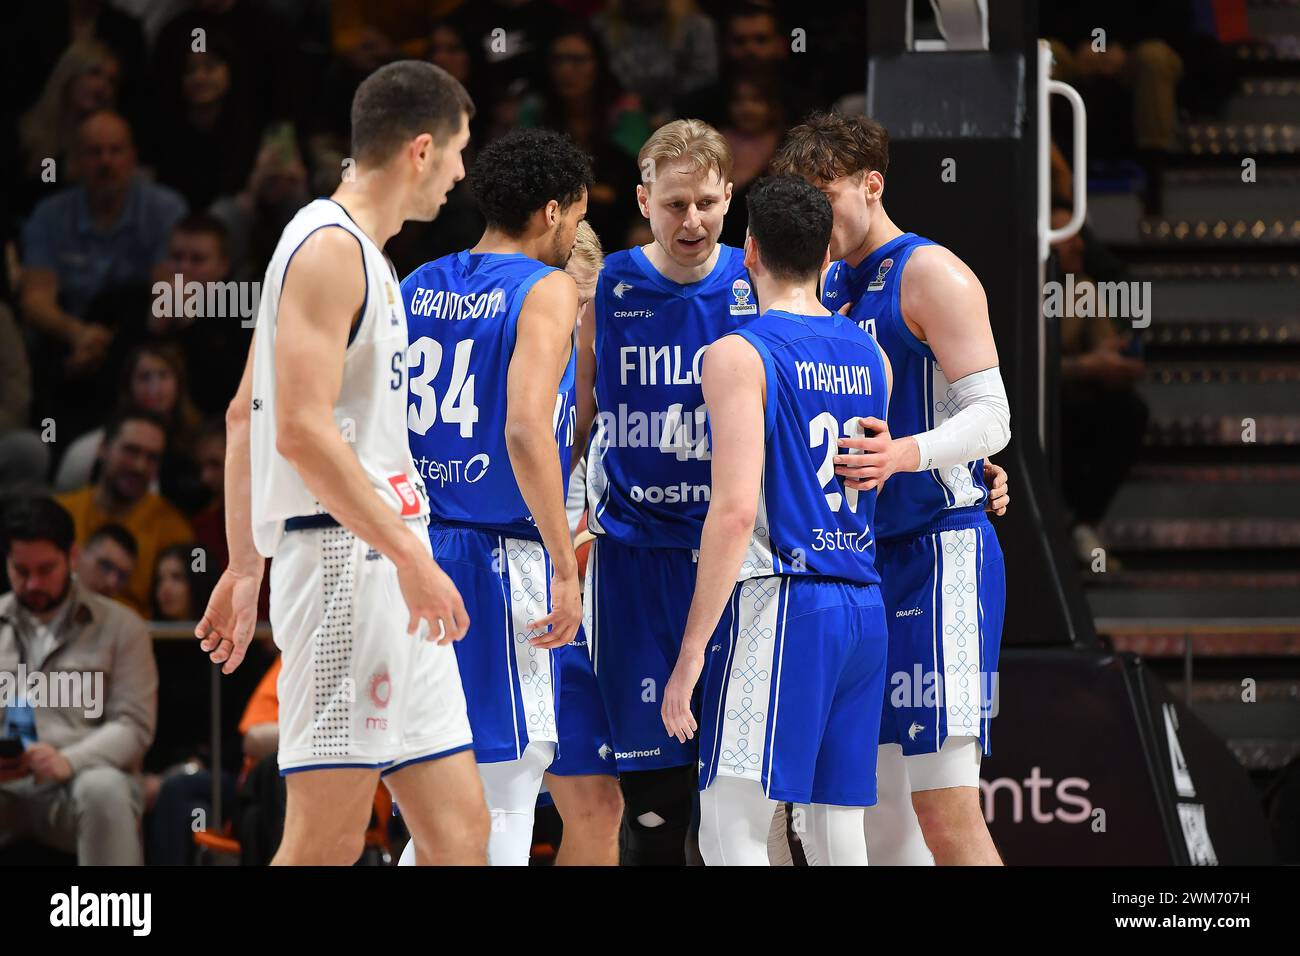 Belgrade, Serbia, 23 February, 2023. Daniel Dolenc of Finland speaks to his teammates during the EuroBasket 2025 Qualifiers match between Serbia and Finland at Aleksandar Nikolic in Belgrade, Serbia. February 23, 2023. Credit: Nikola Krstic/Alamy Stock Photo